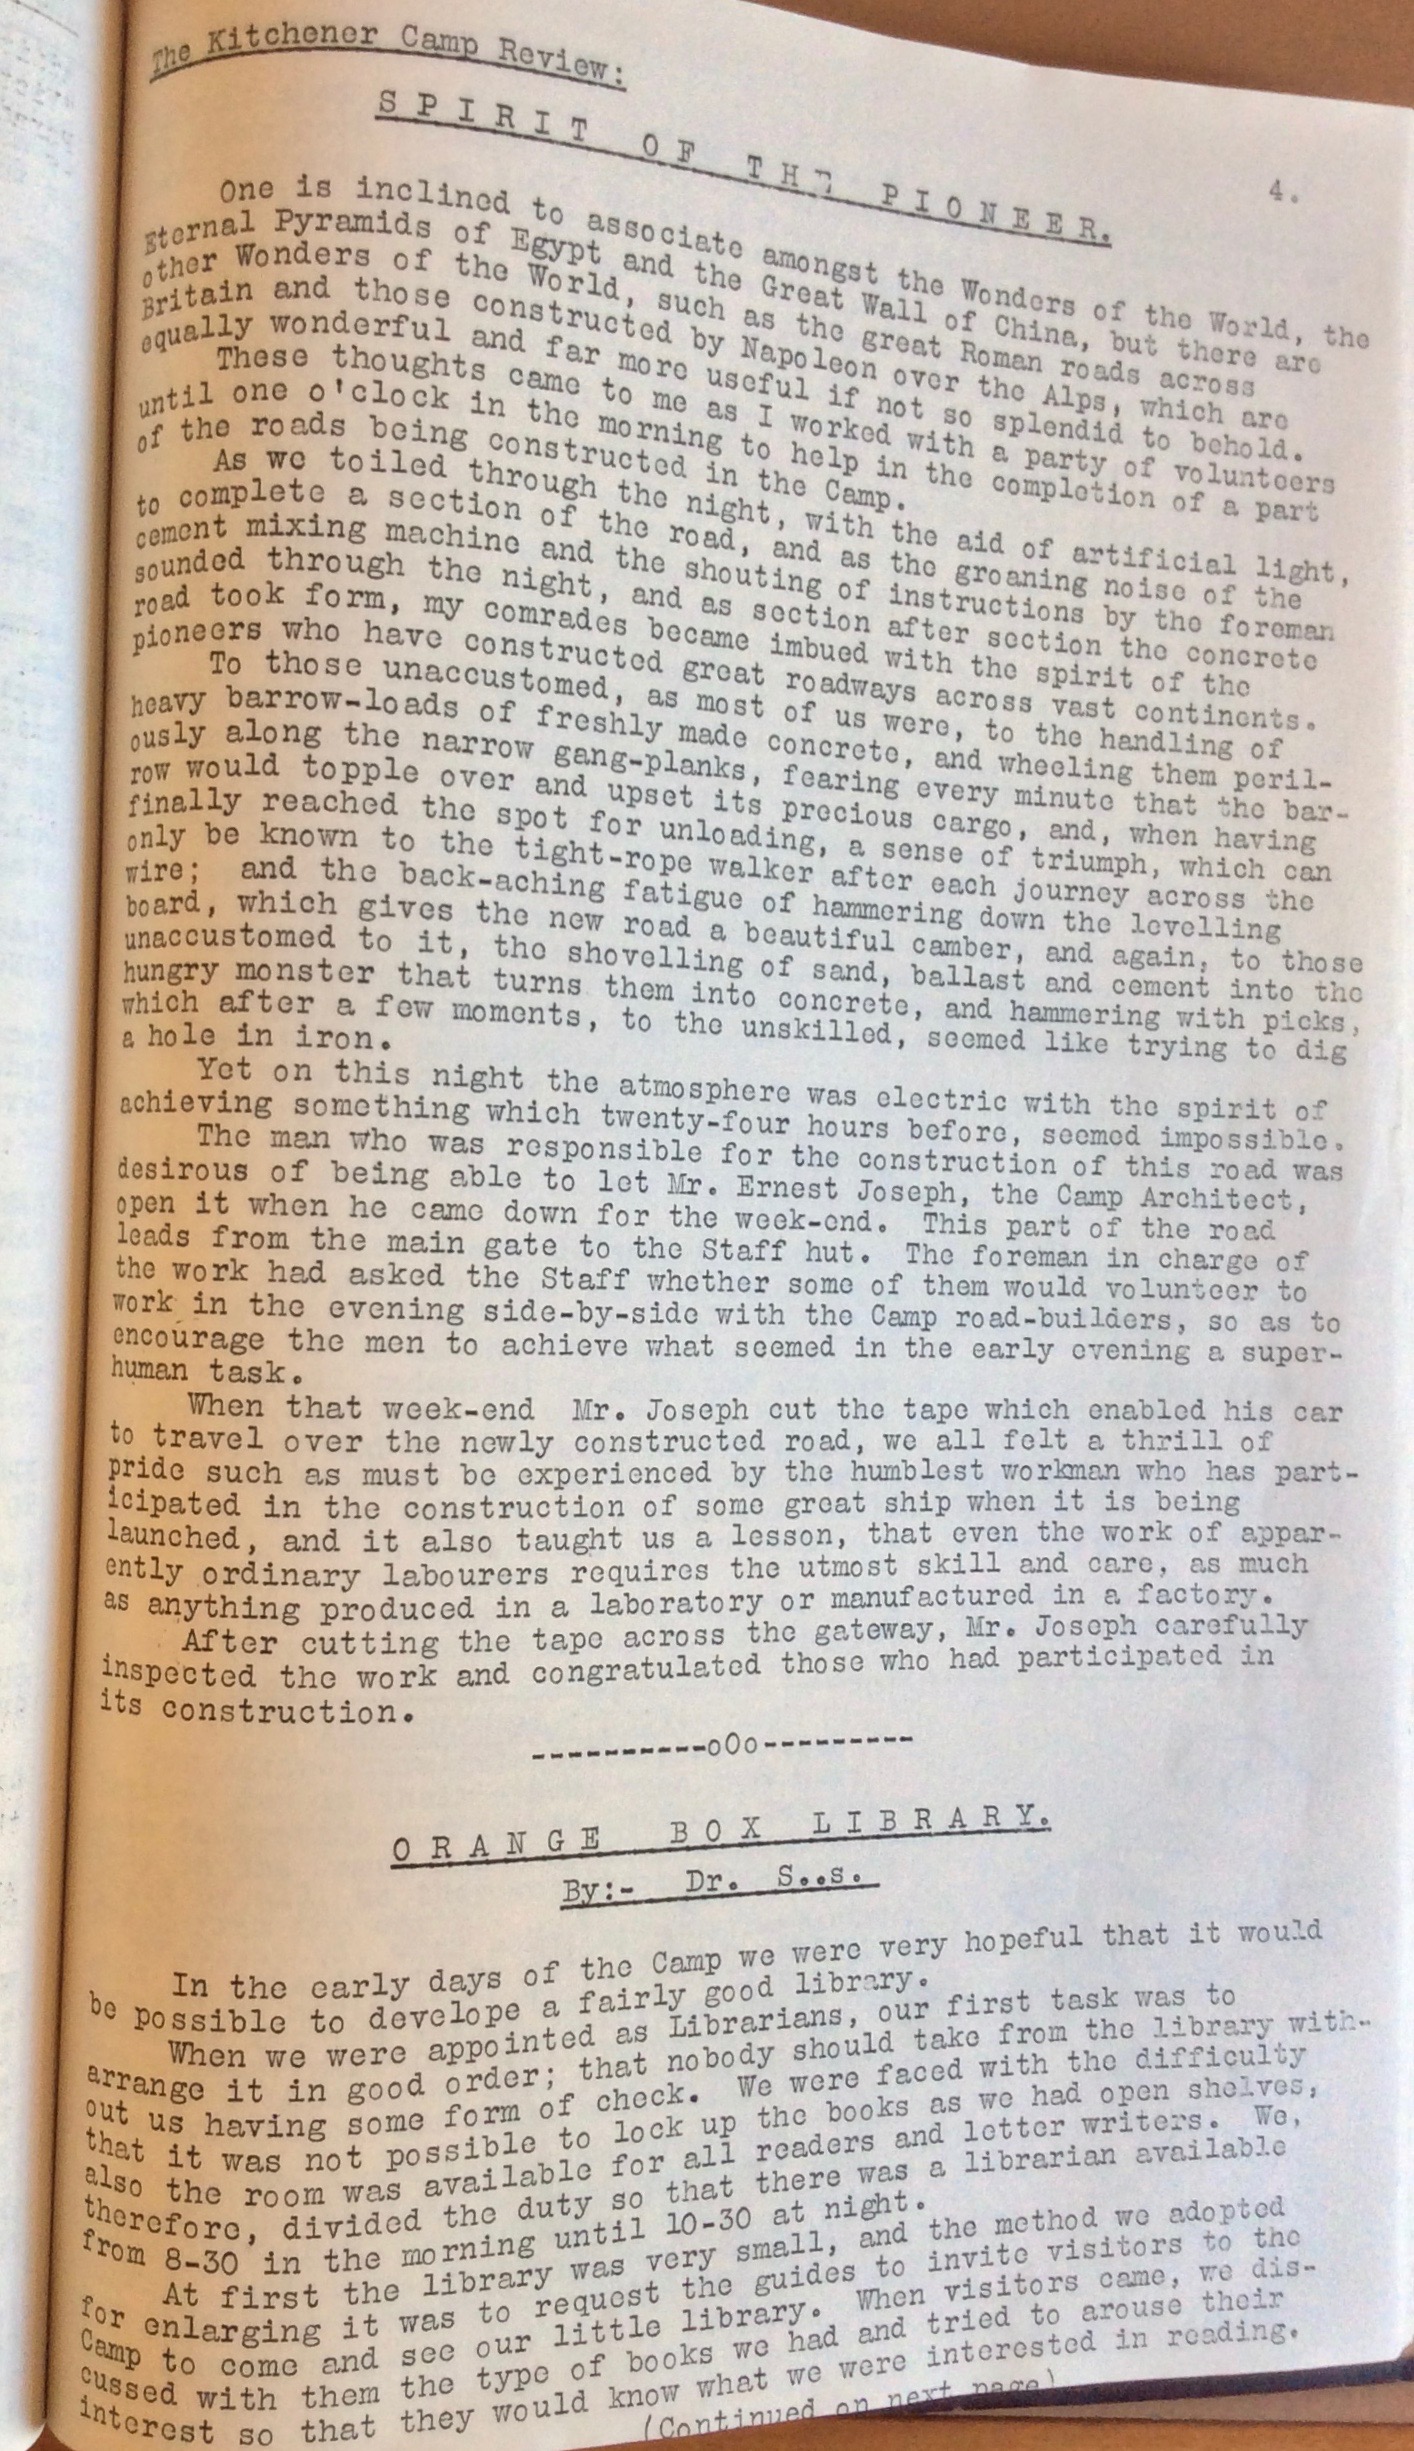 The Kitchener Camp Review, August 1939, page 4